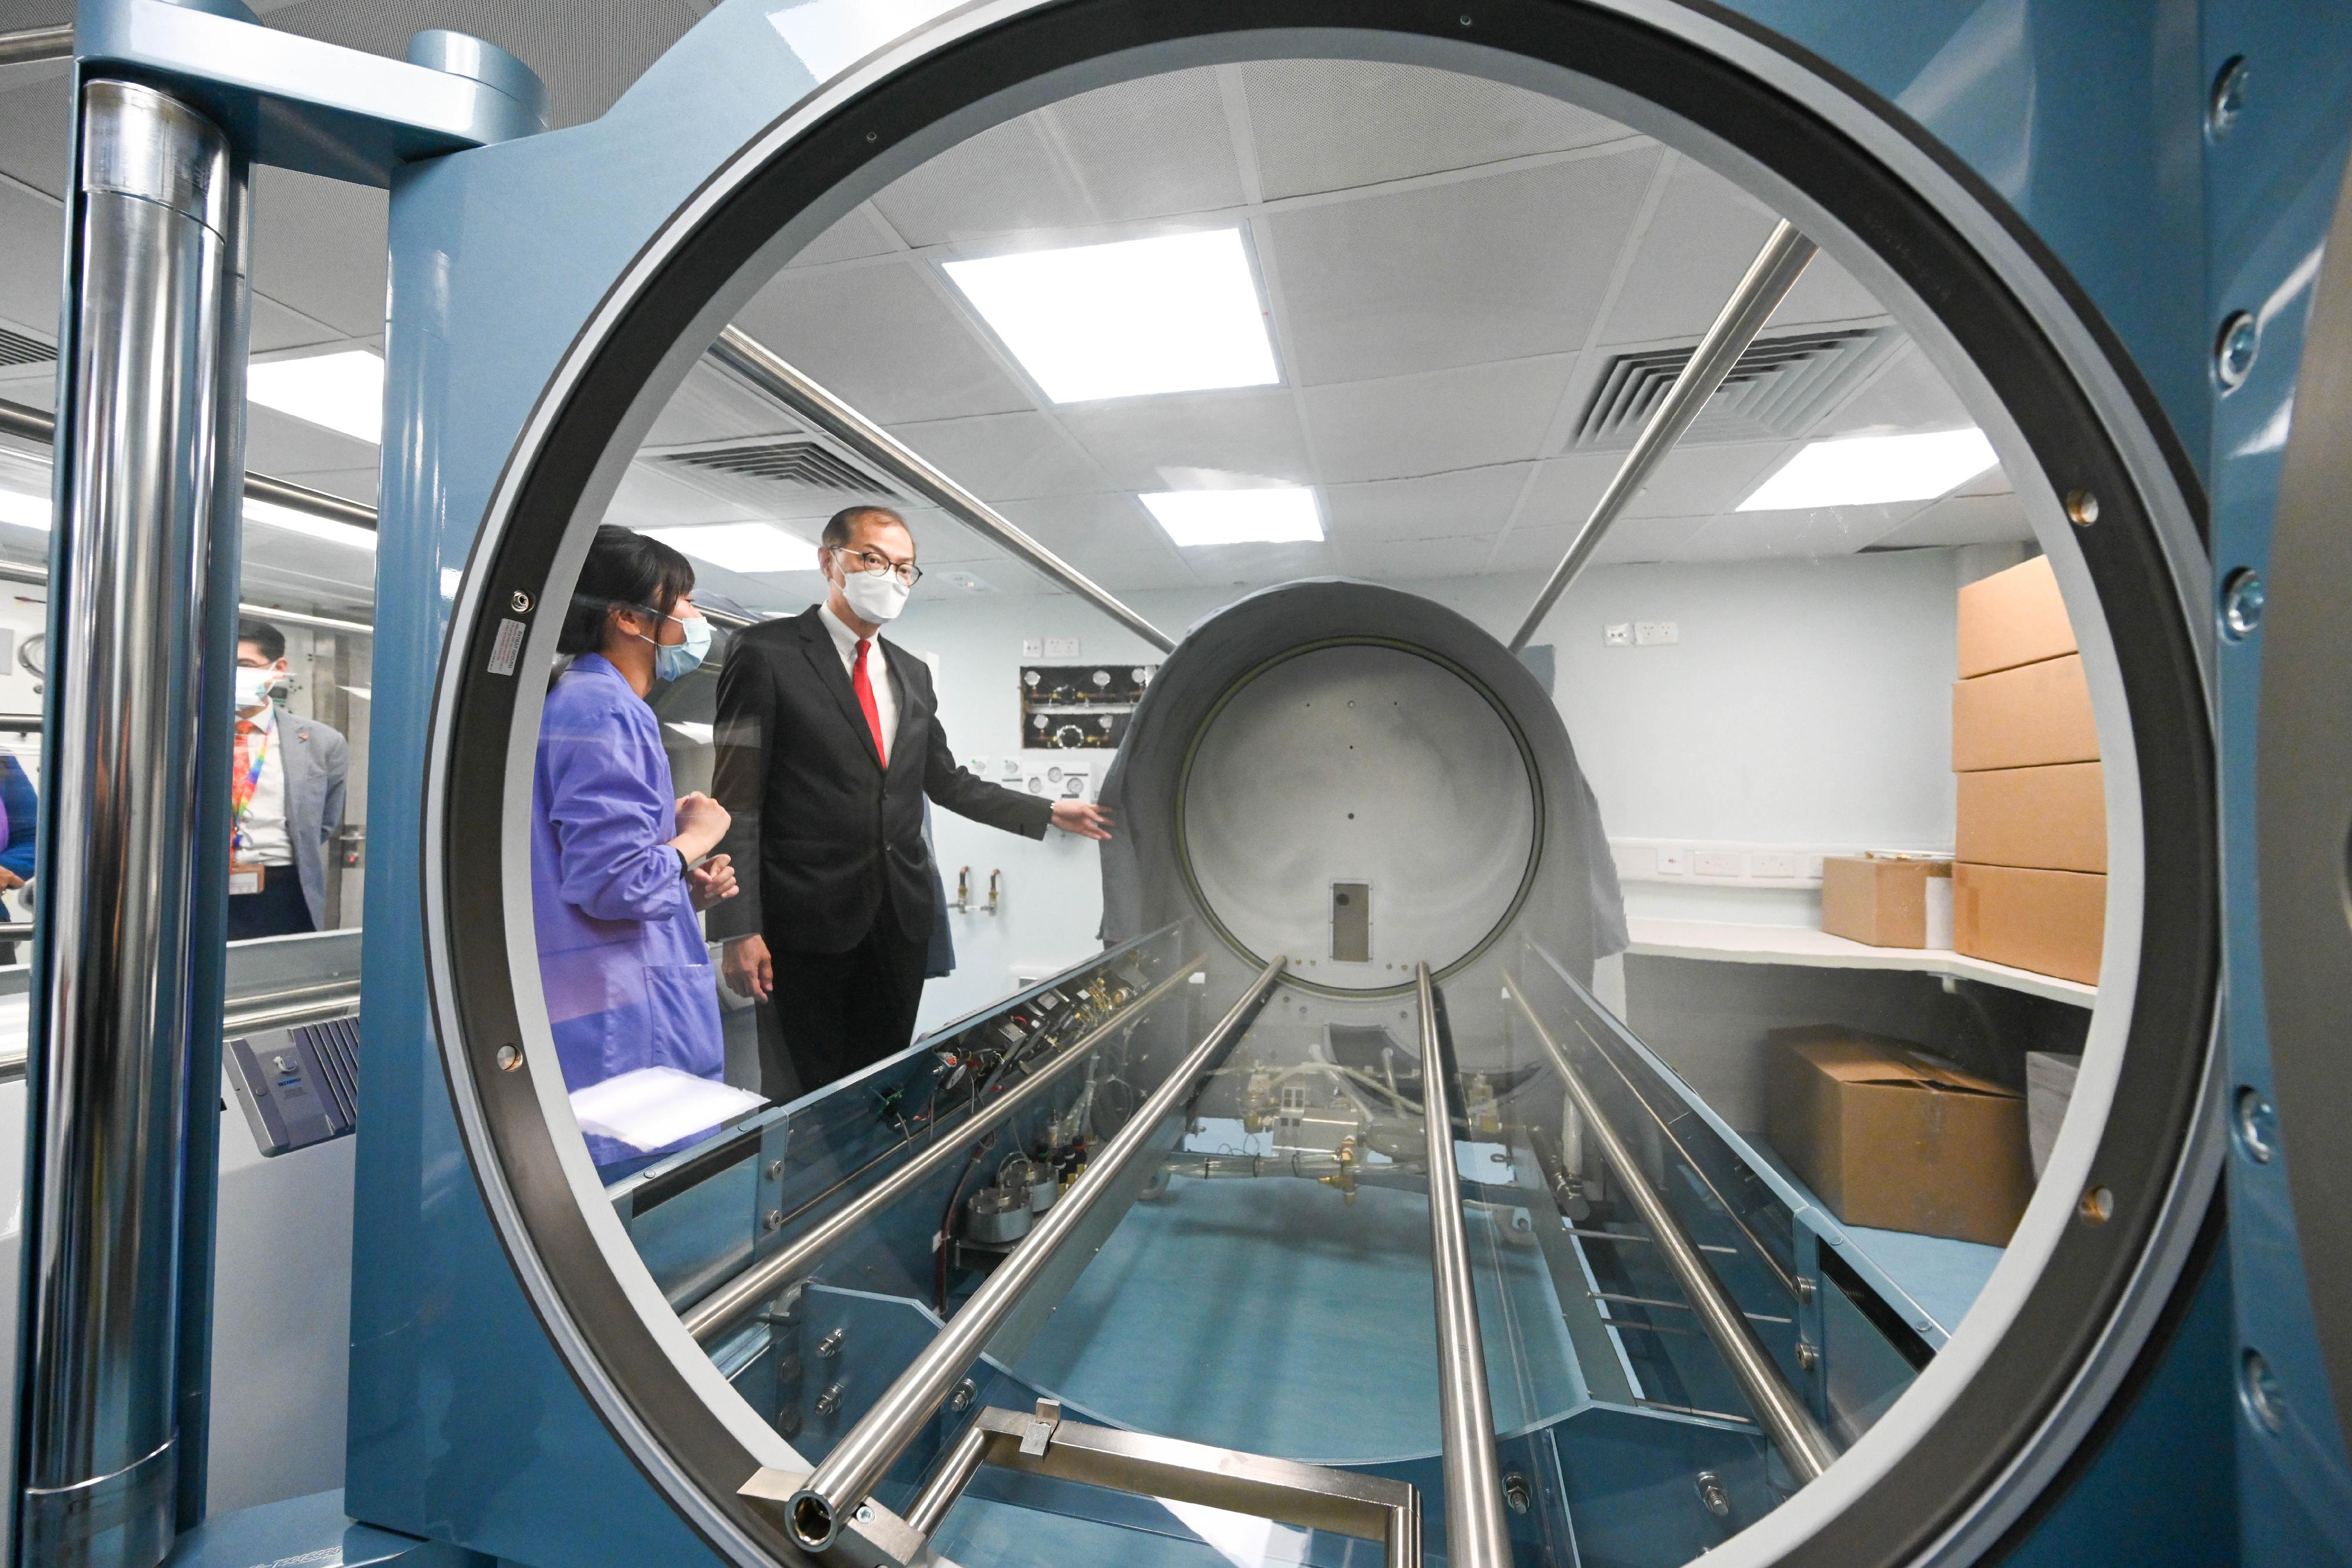 The Secretary for Health, Professor Lo Chung-mau (right), visited the Hyperbaric Oxygen Therapy Centre of Pamela Youde Nethersole Eastern Hospital today (February 6).